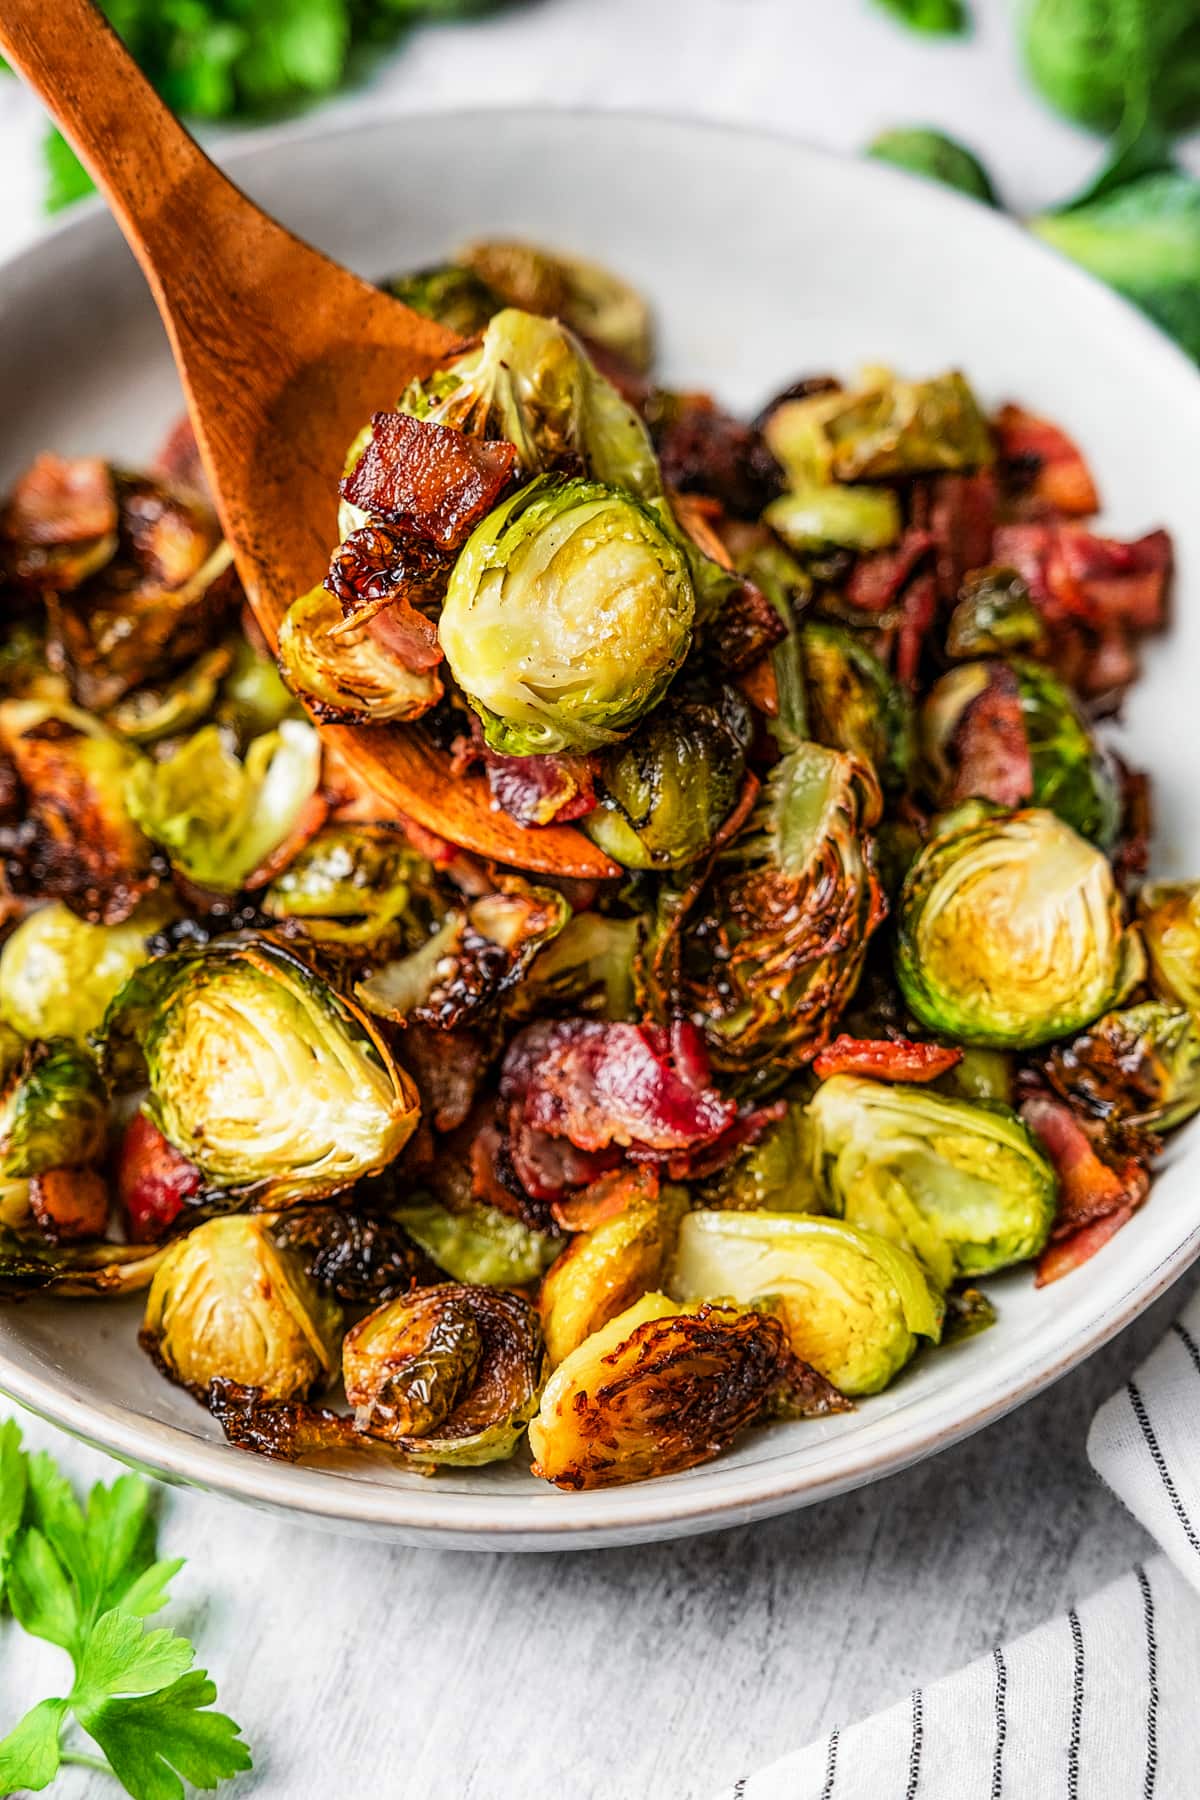 Scooping roasted Brussels sprouts and bacon from a serving bowl with a wooden serving fork.